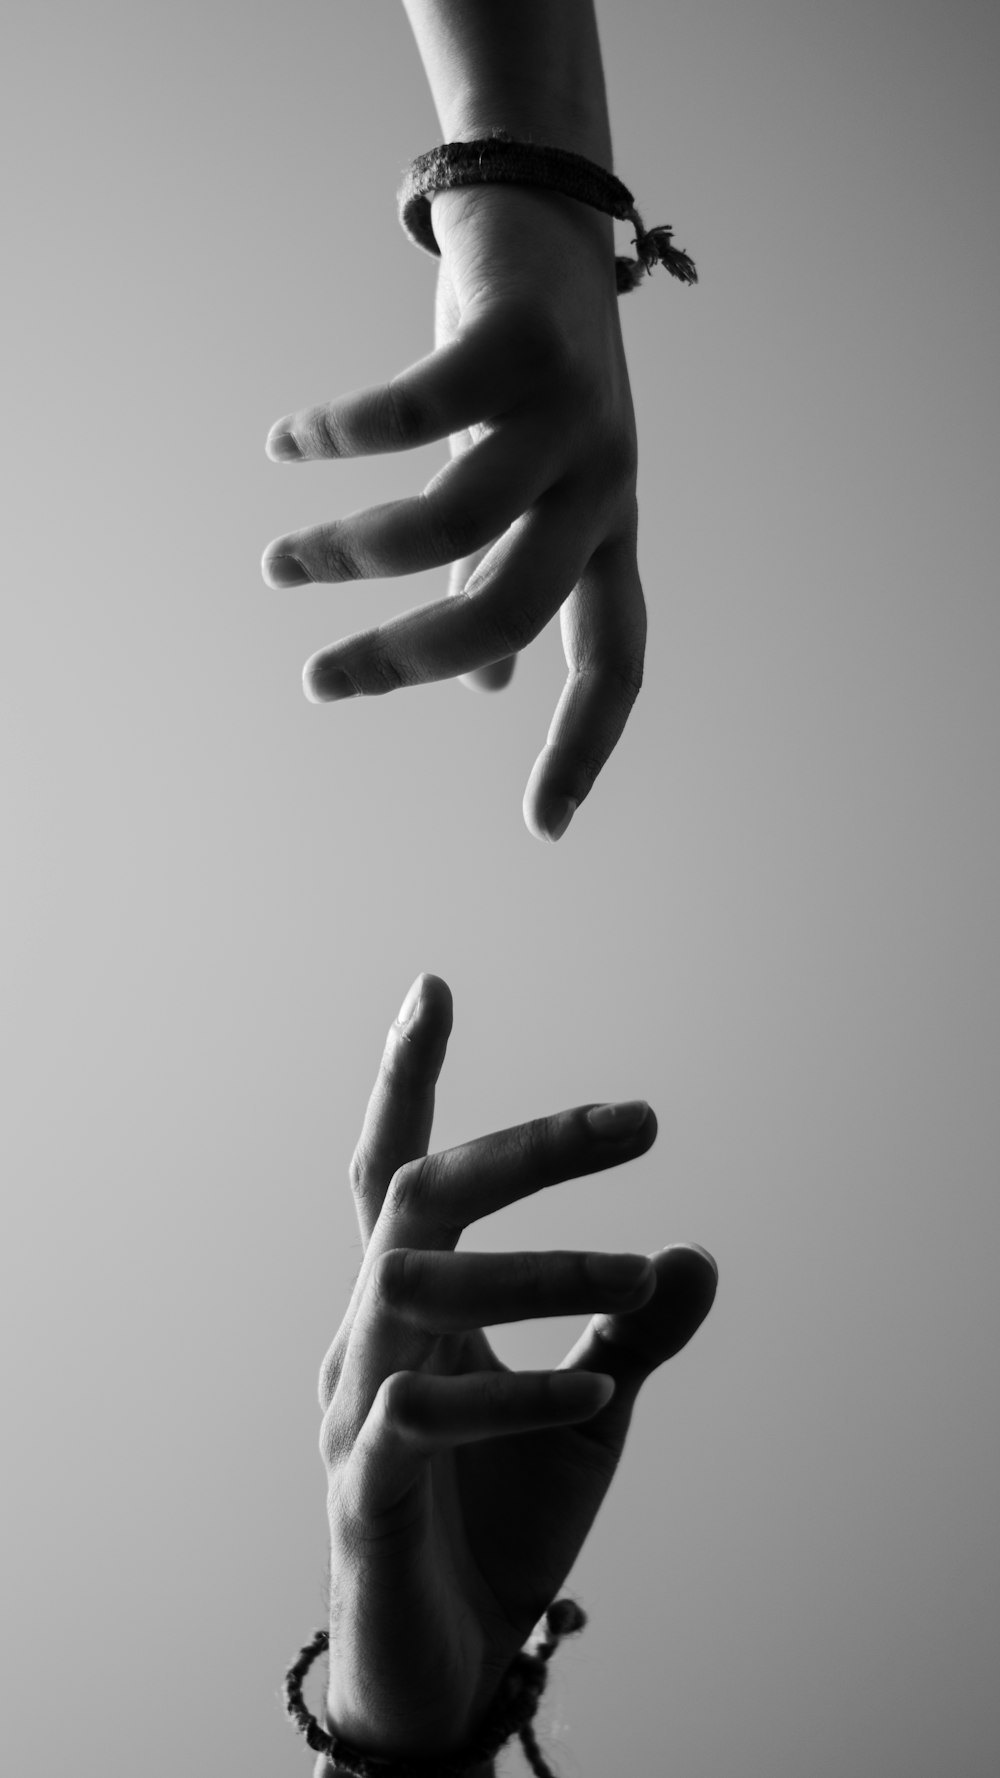 two hands reaching for each other in the air